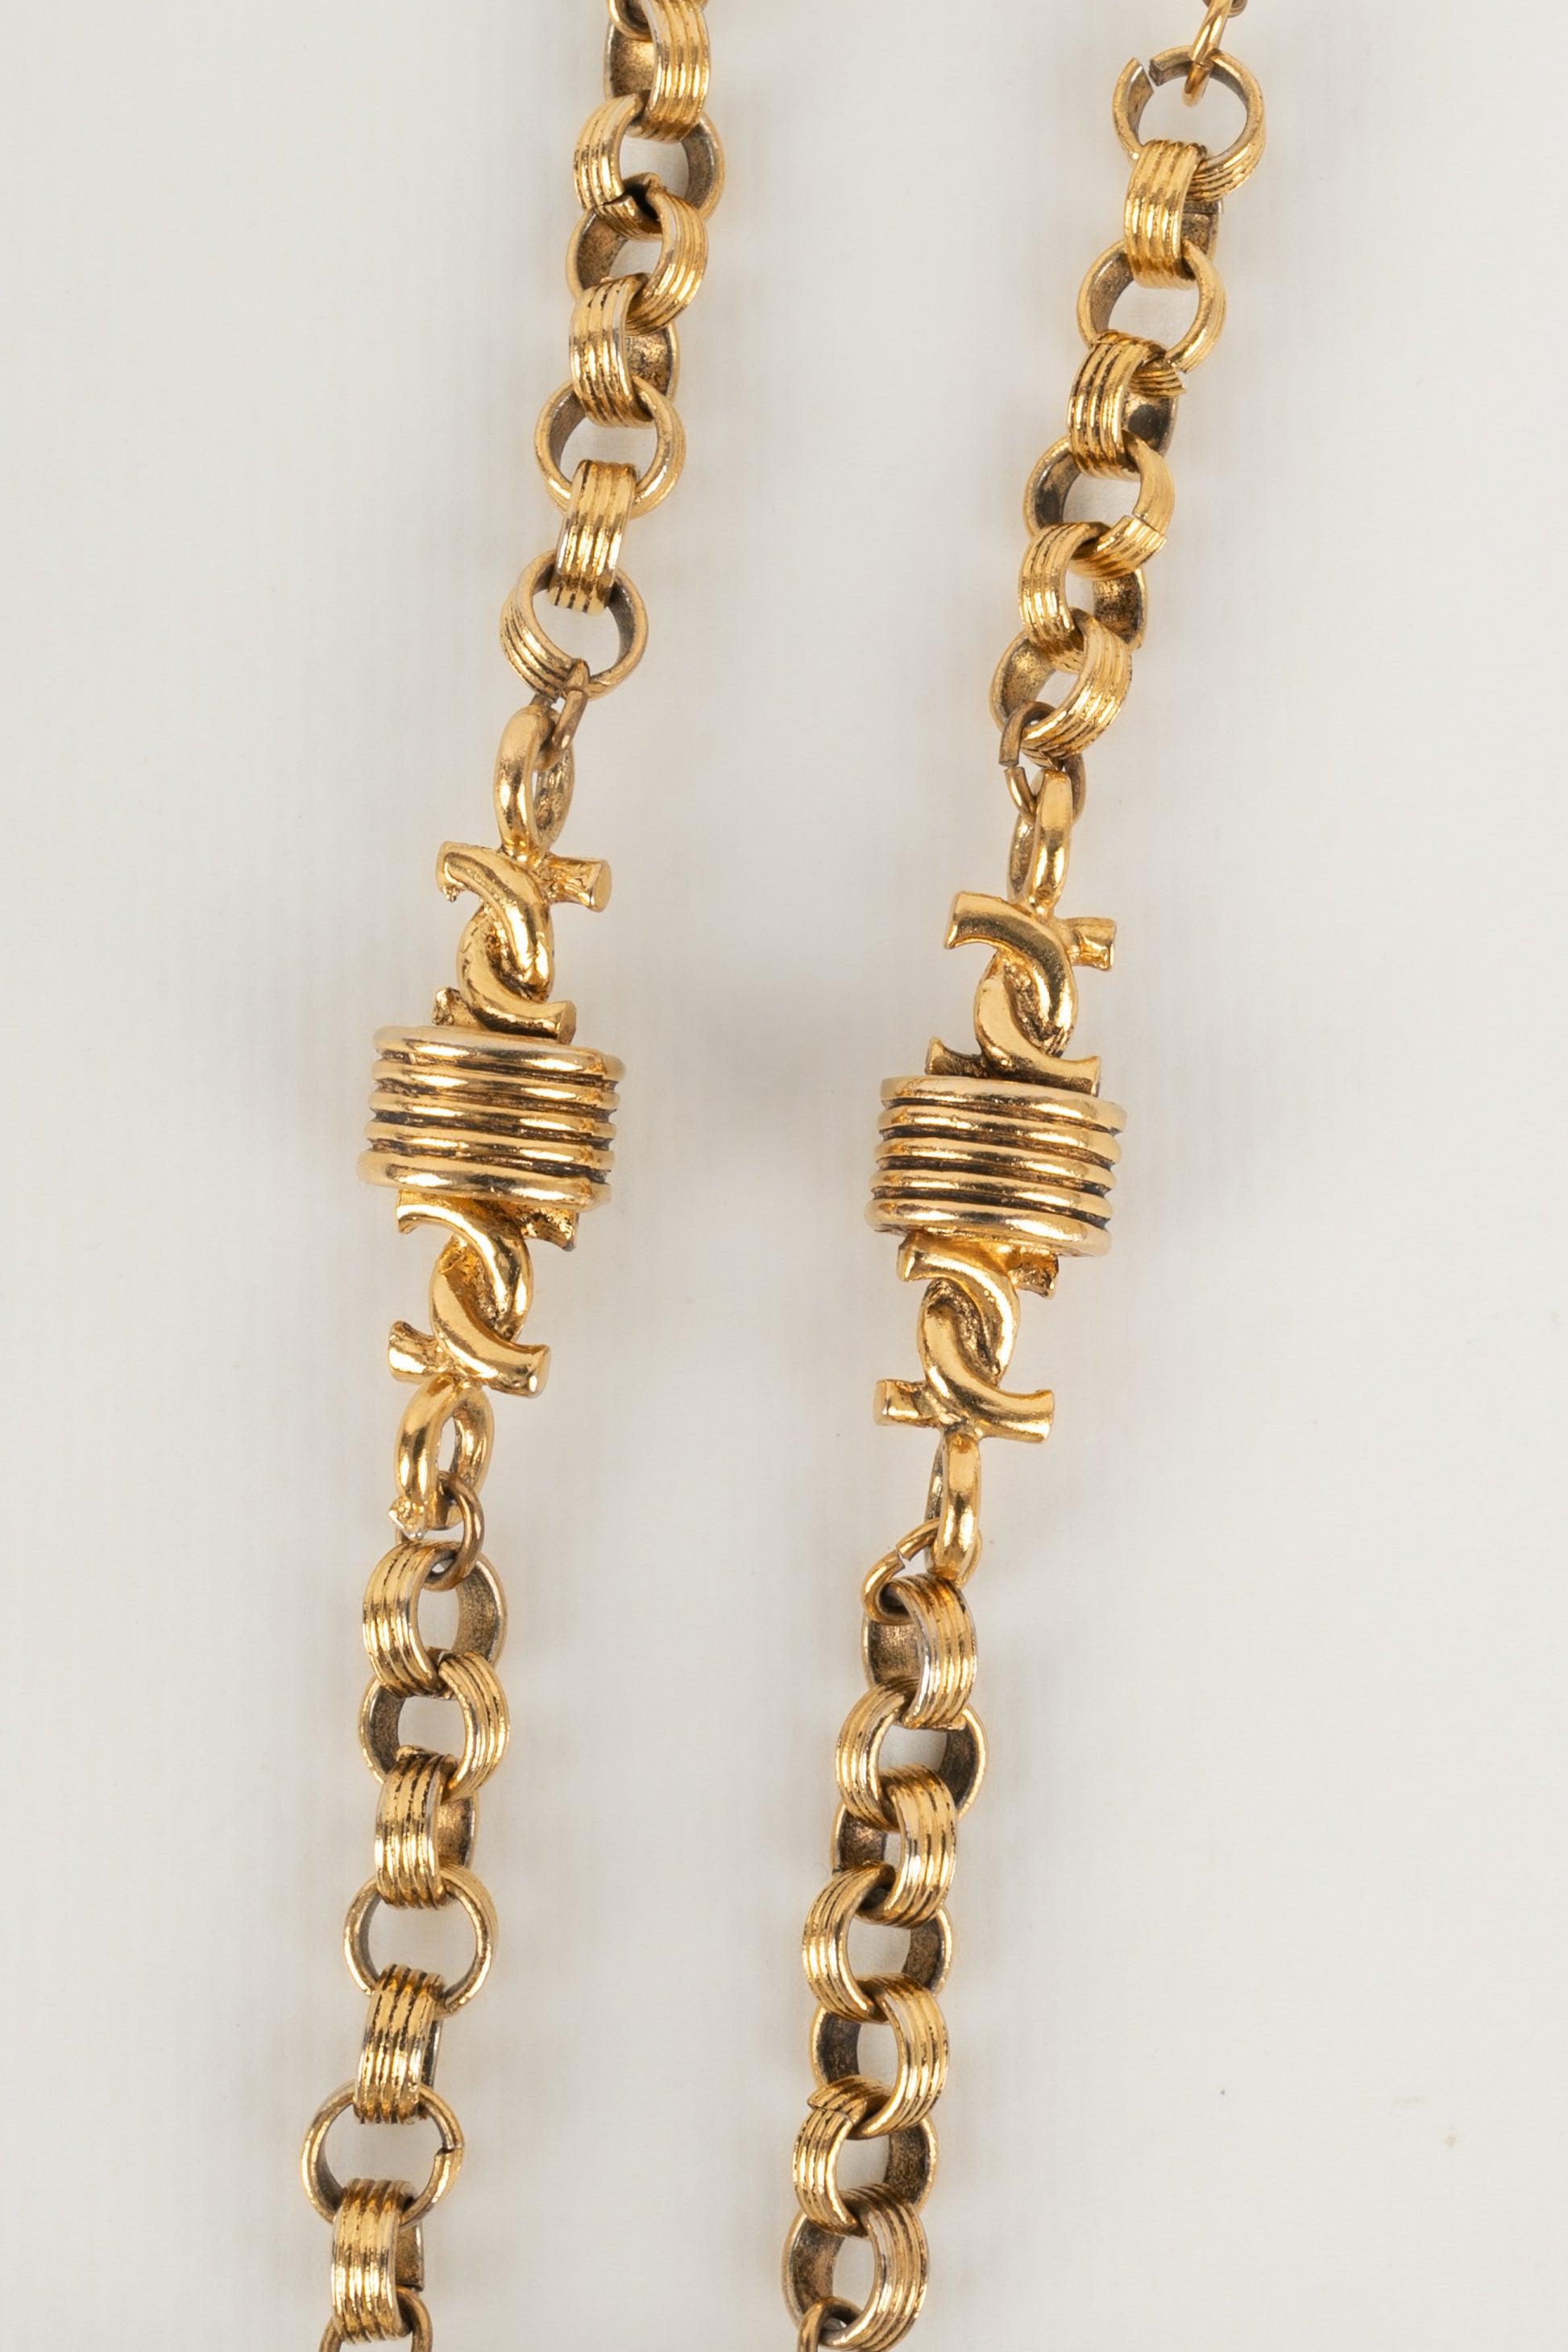 Women's Chanel Golden Metal Necklace with Costume Pearls, 1980s For Sale